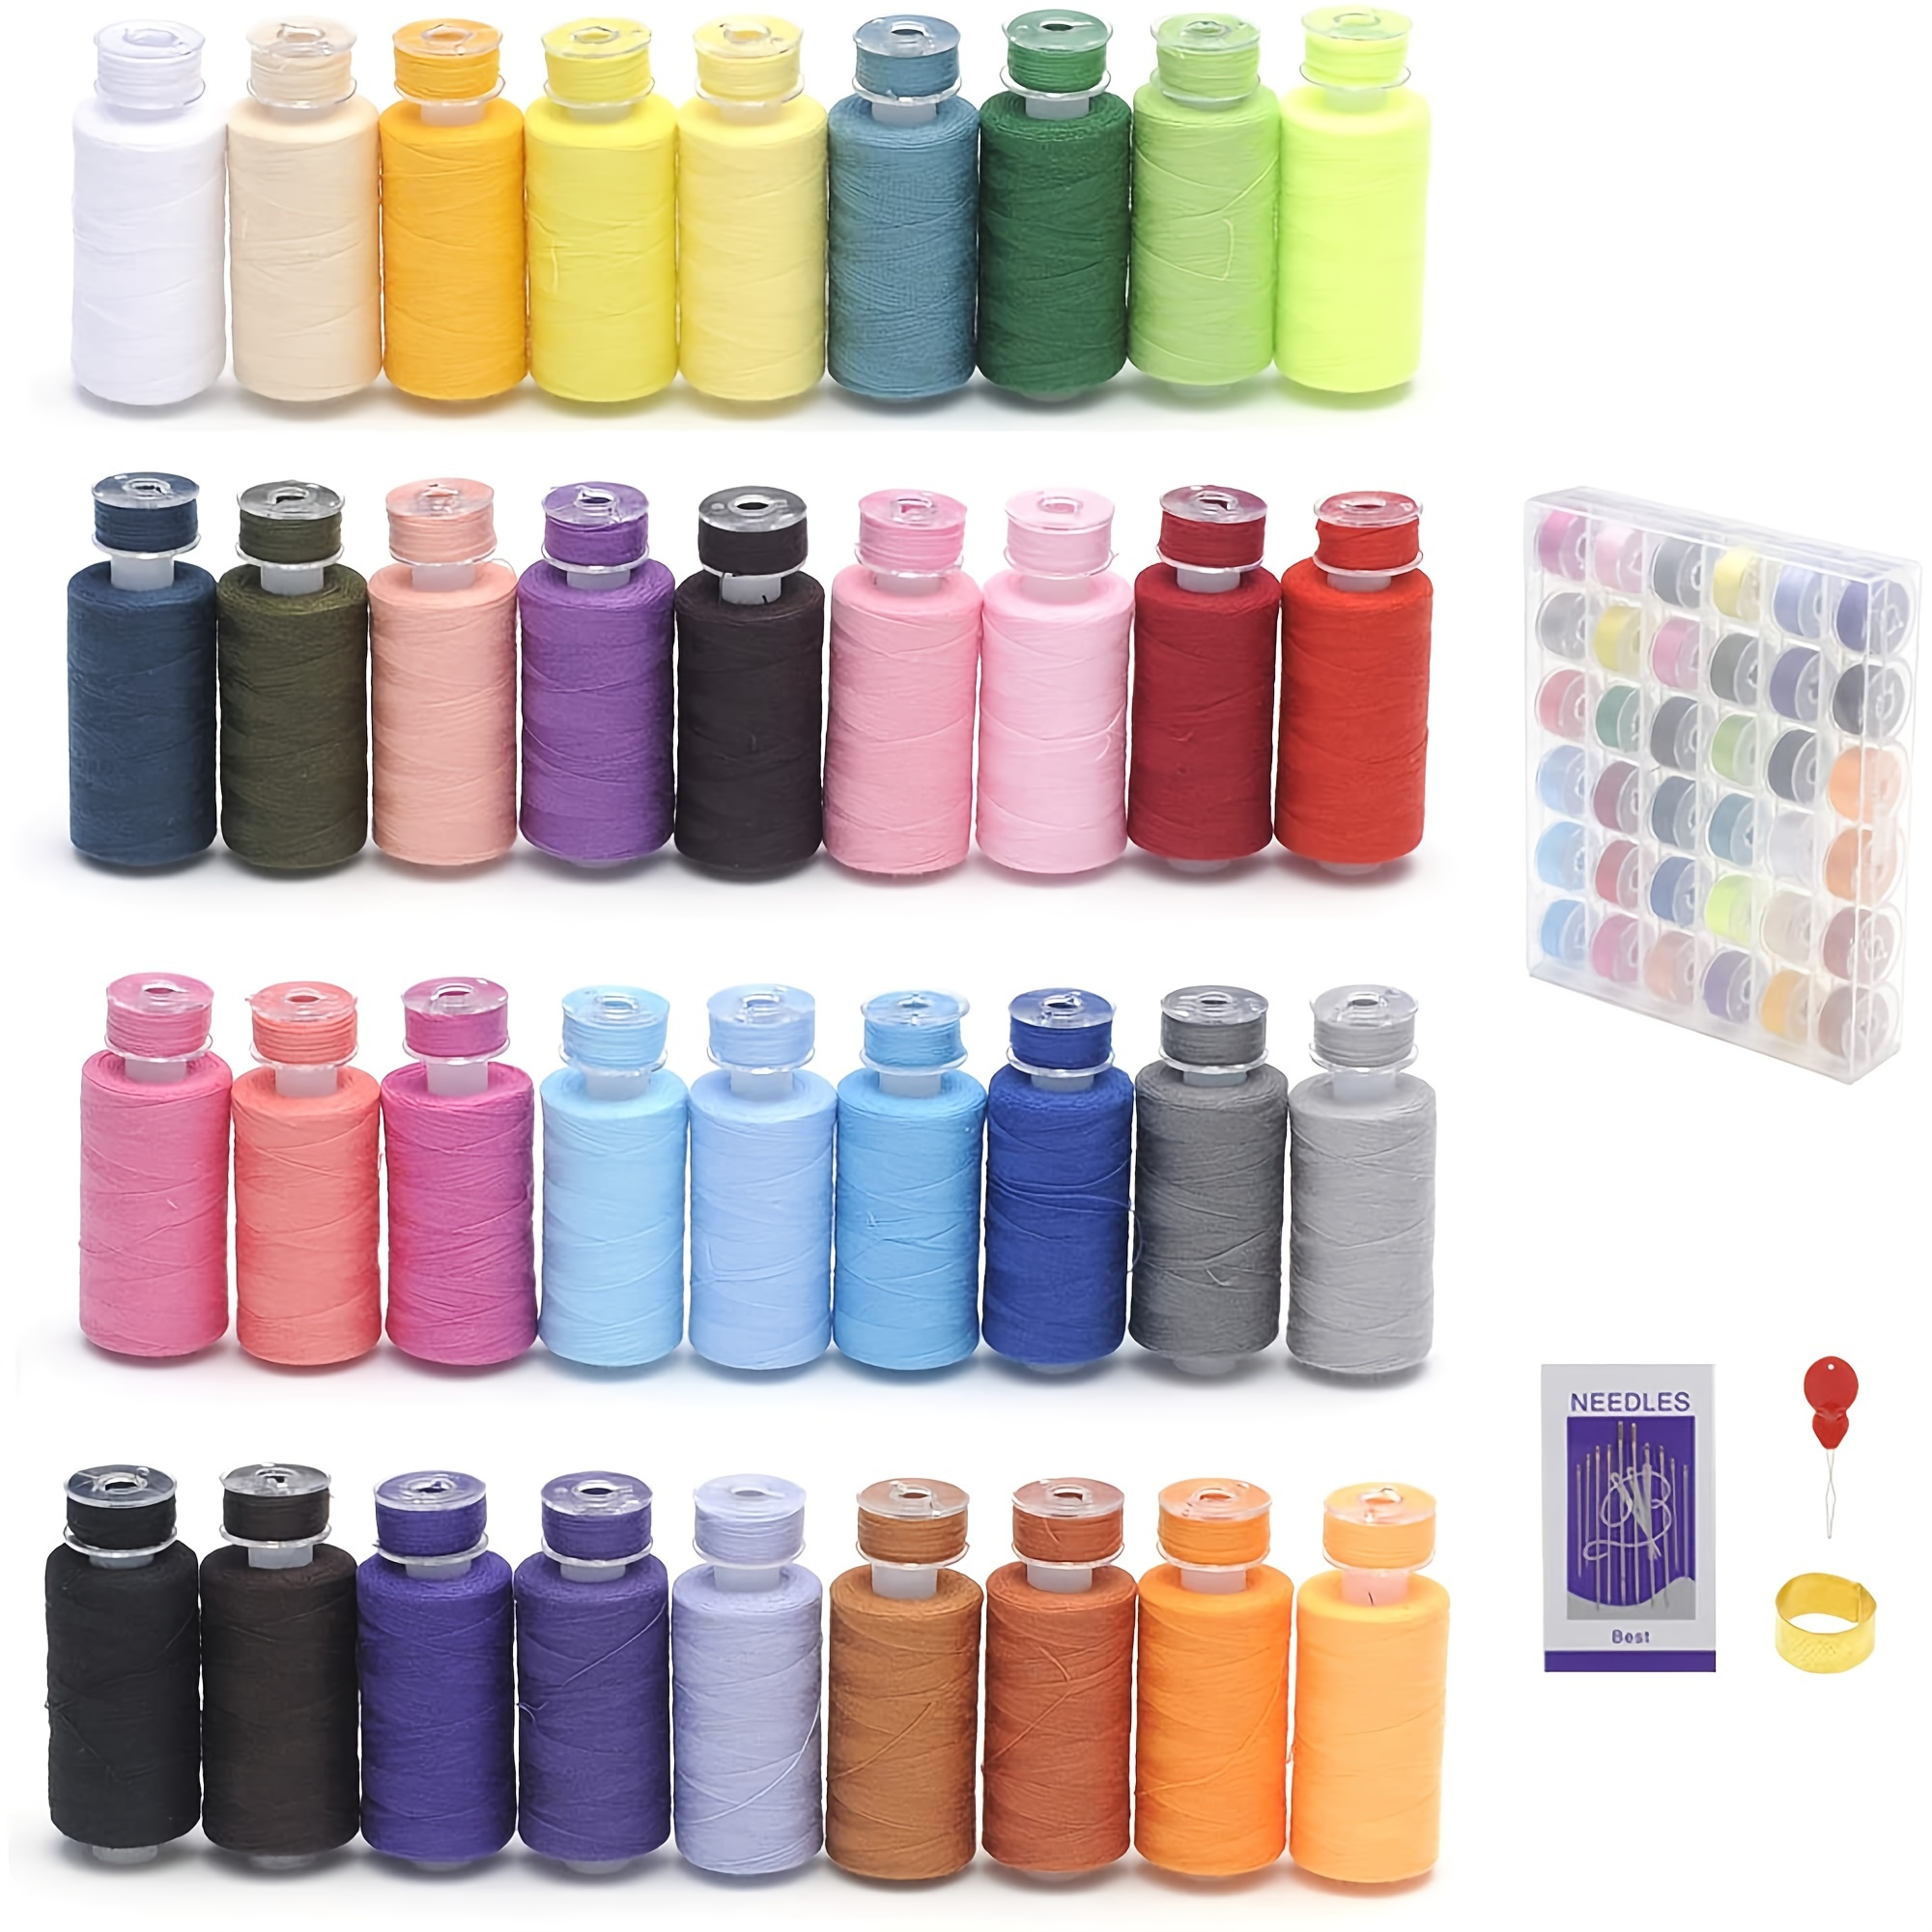 

72pcs Sewing Thread Kit, 36 Colors, Polyester, 400 Yards Per Spools, Prewound Bobbin Threads With Case, Compatible With Hand & Machine Sewing